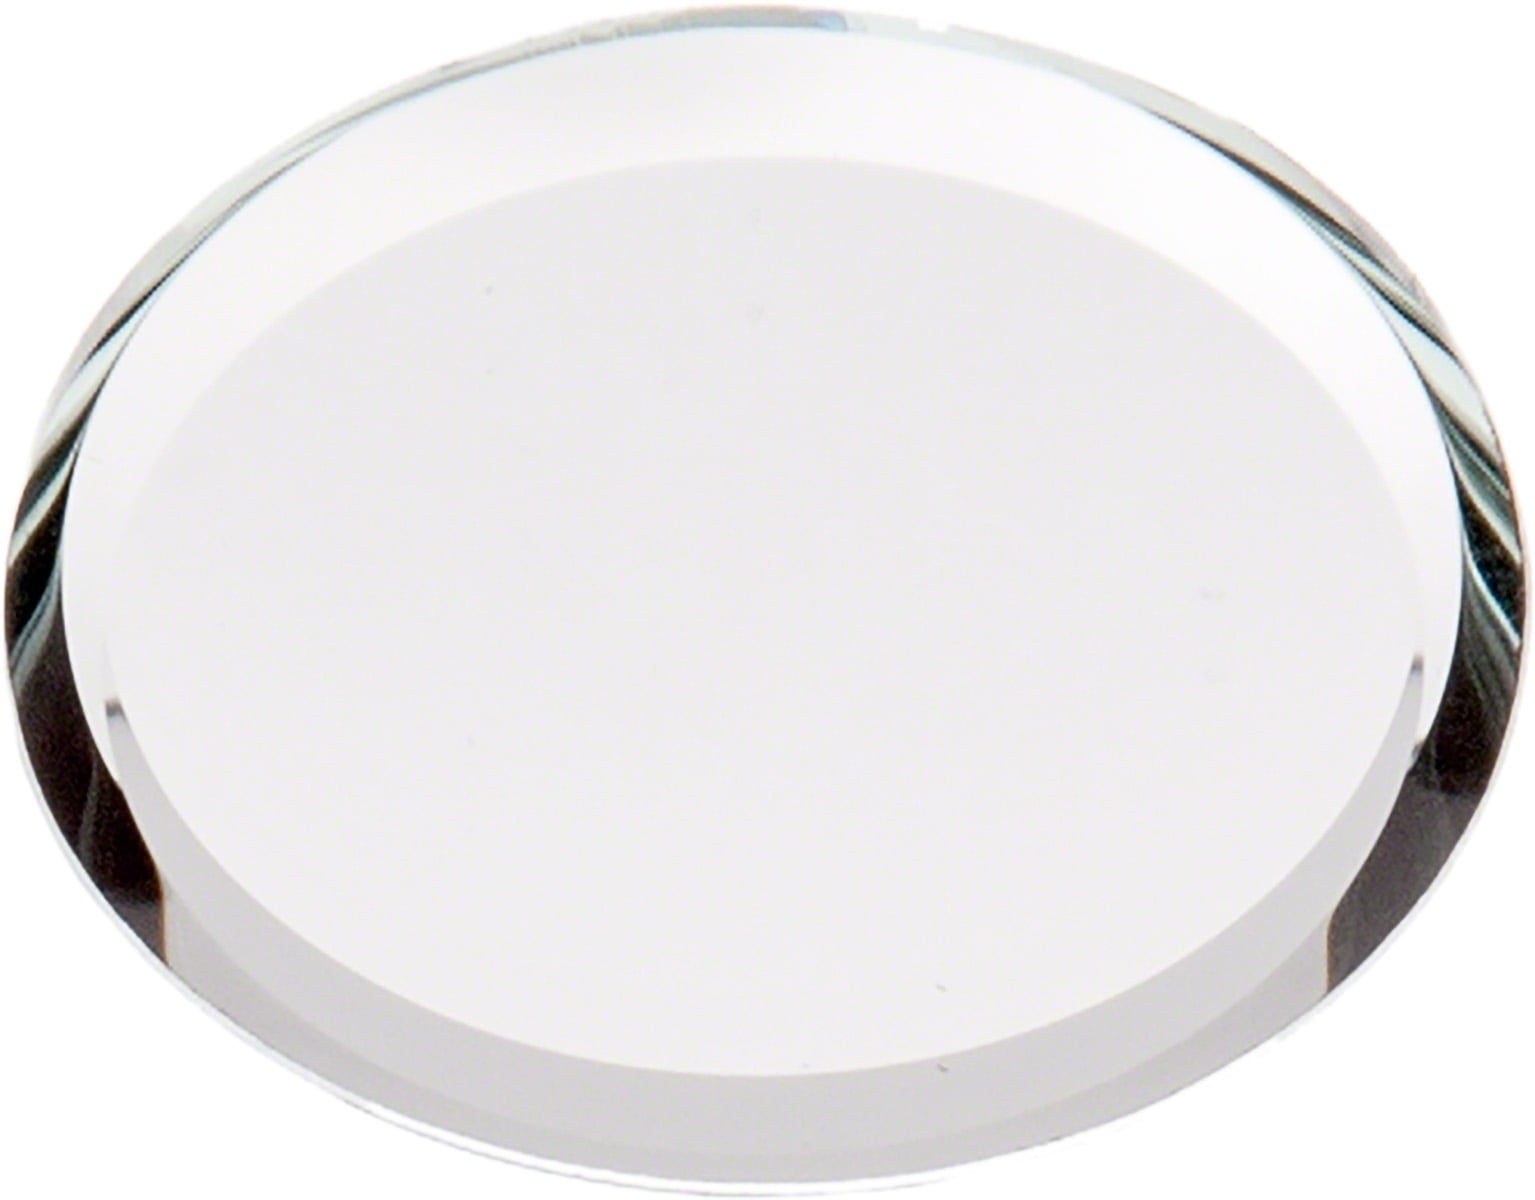 Plymor Round 3mm Non-Beveled Glass Mirror Pack of 24 1.5 inch x 1.5 inch 